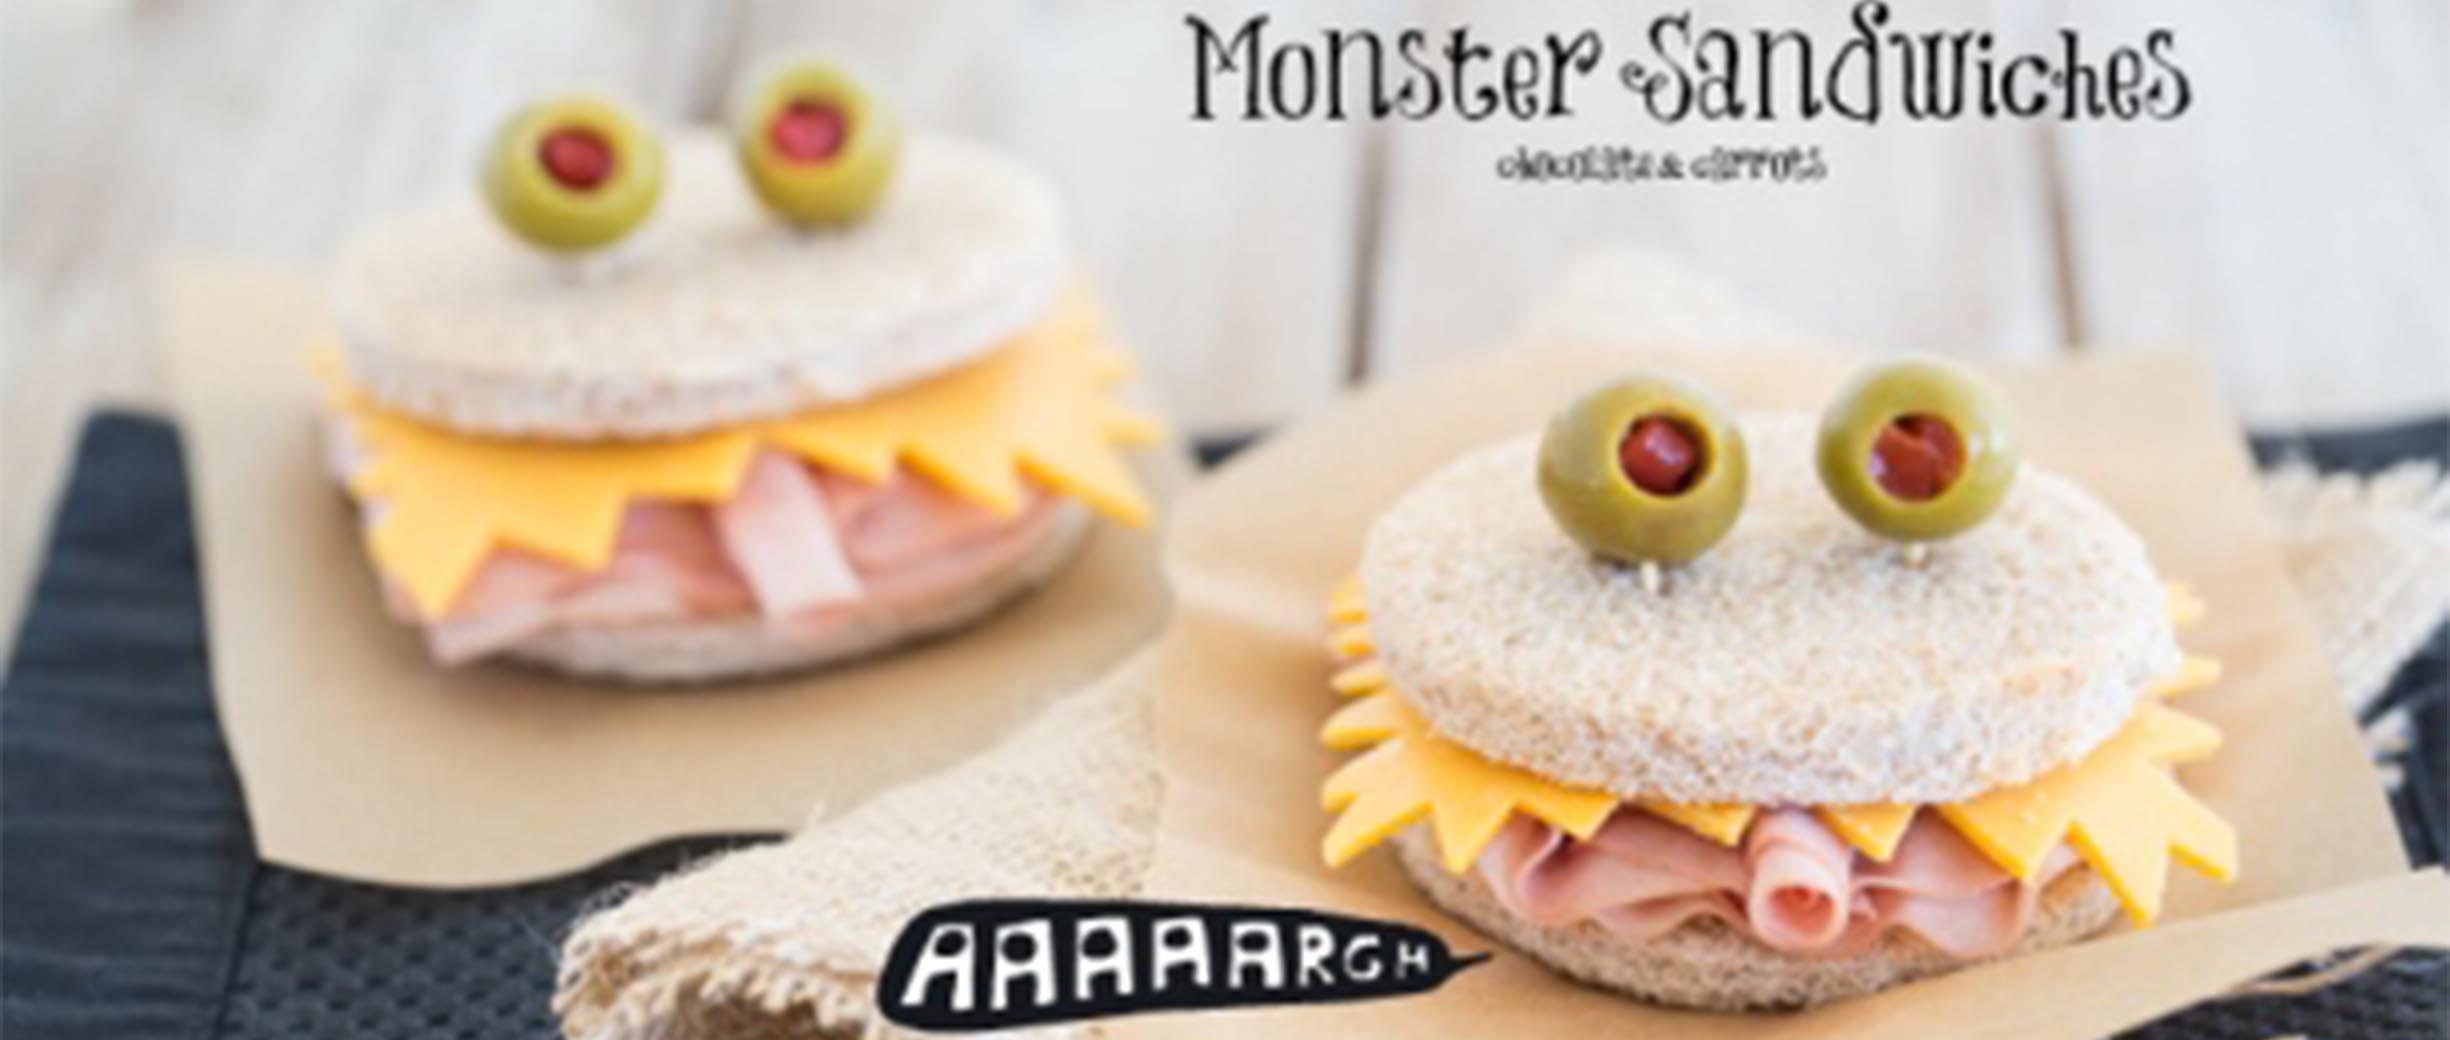 Monster Sandwiches - Land O&amp;#39; Frost